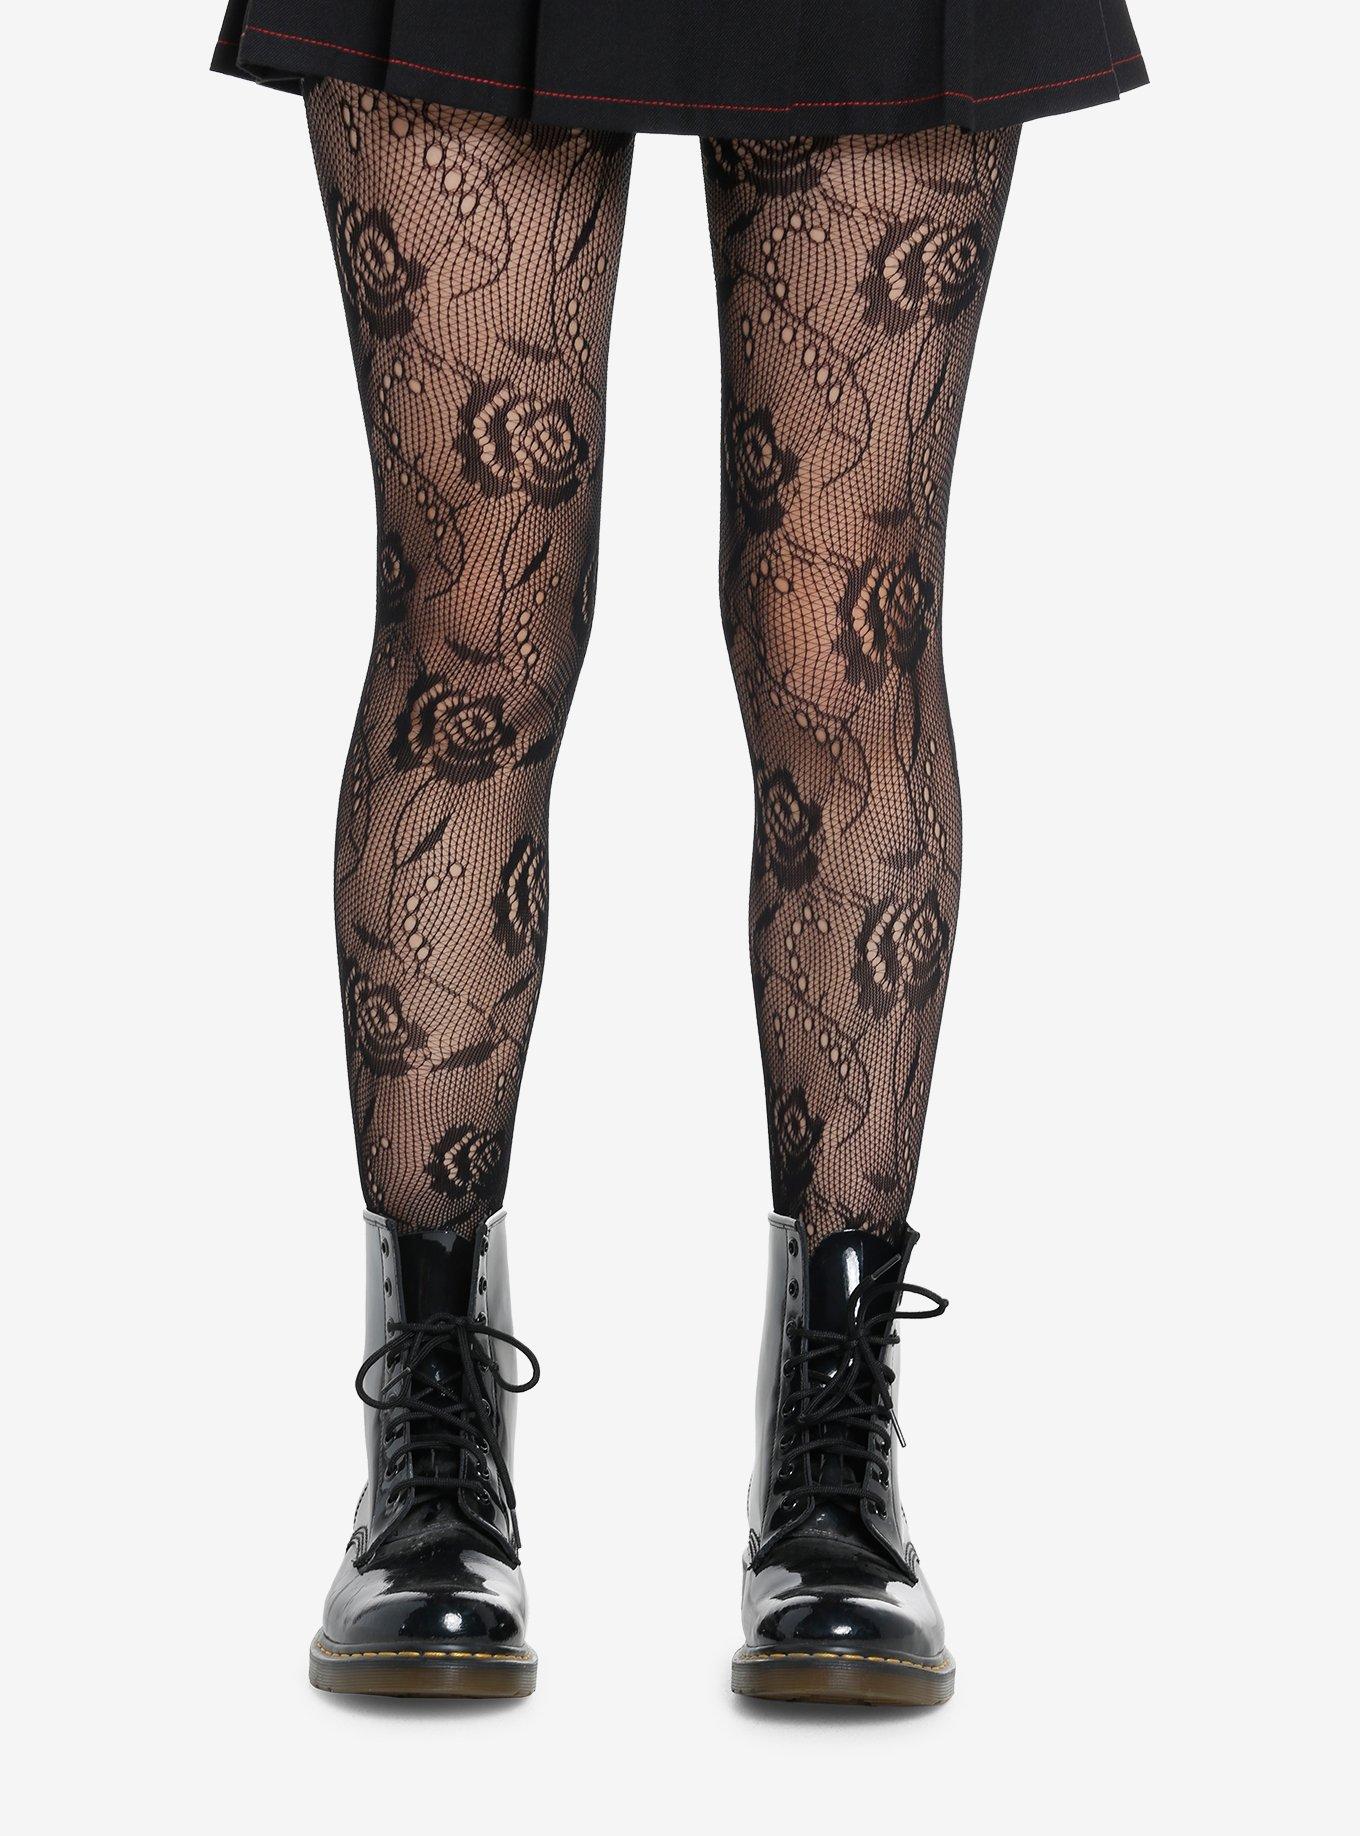 Buy Bunny Bae Fashion Fishnet Stockings Lace Patterned Tights for